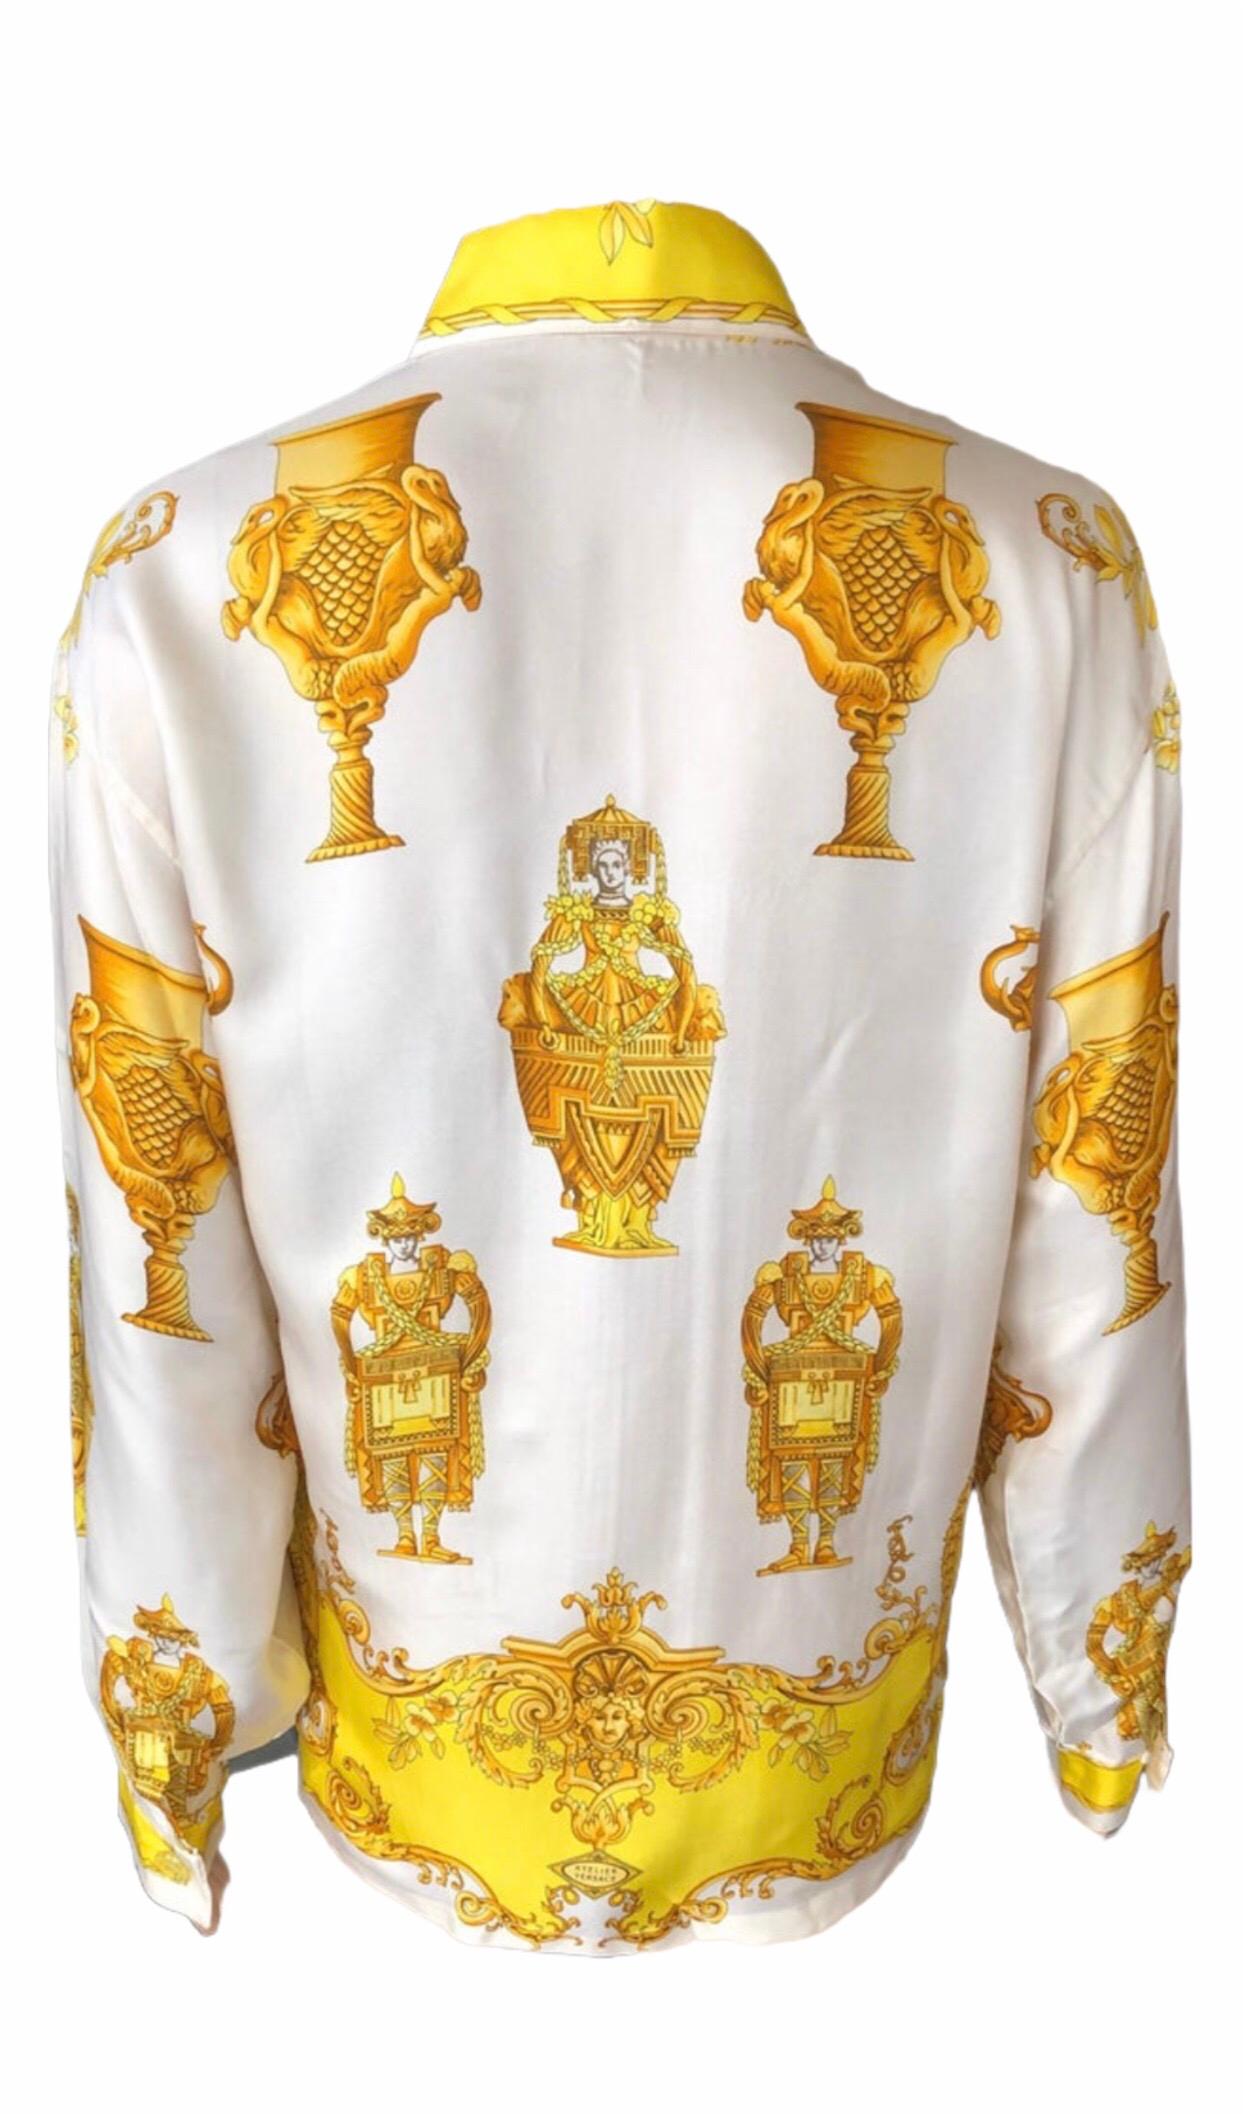 GIANNI VERSACE Vintage Sexy Plunging Decollete Silk Shirt Top IT 44

Versace vintage long sleeve blouse featuring print throughout, pointed collar and concealed button closures at front.

About Versace: Founded in 1978 by the late Gianni Versace,